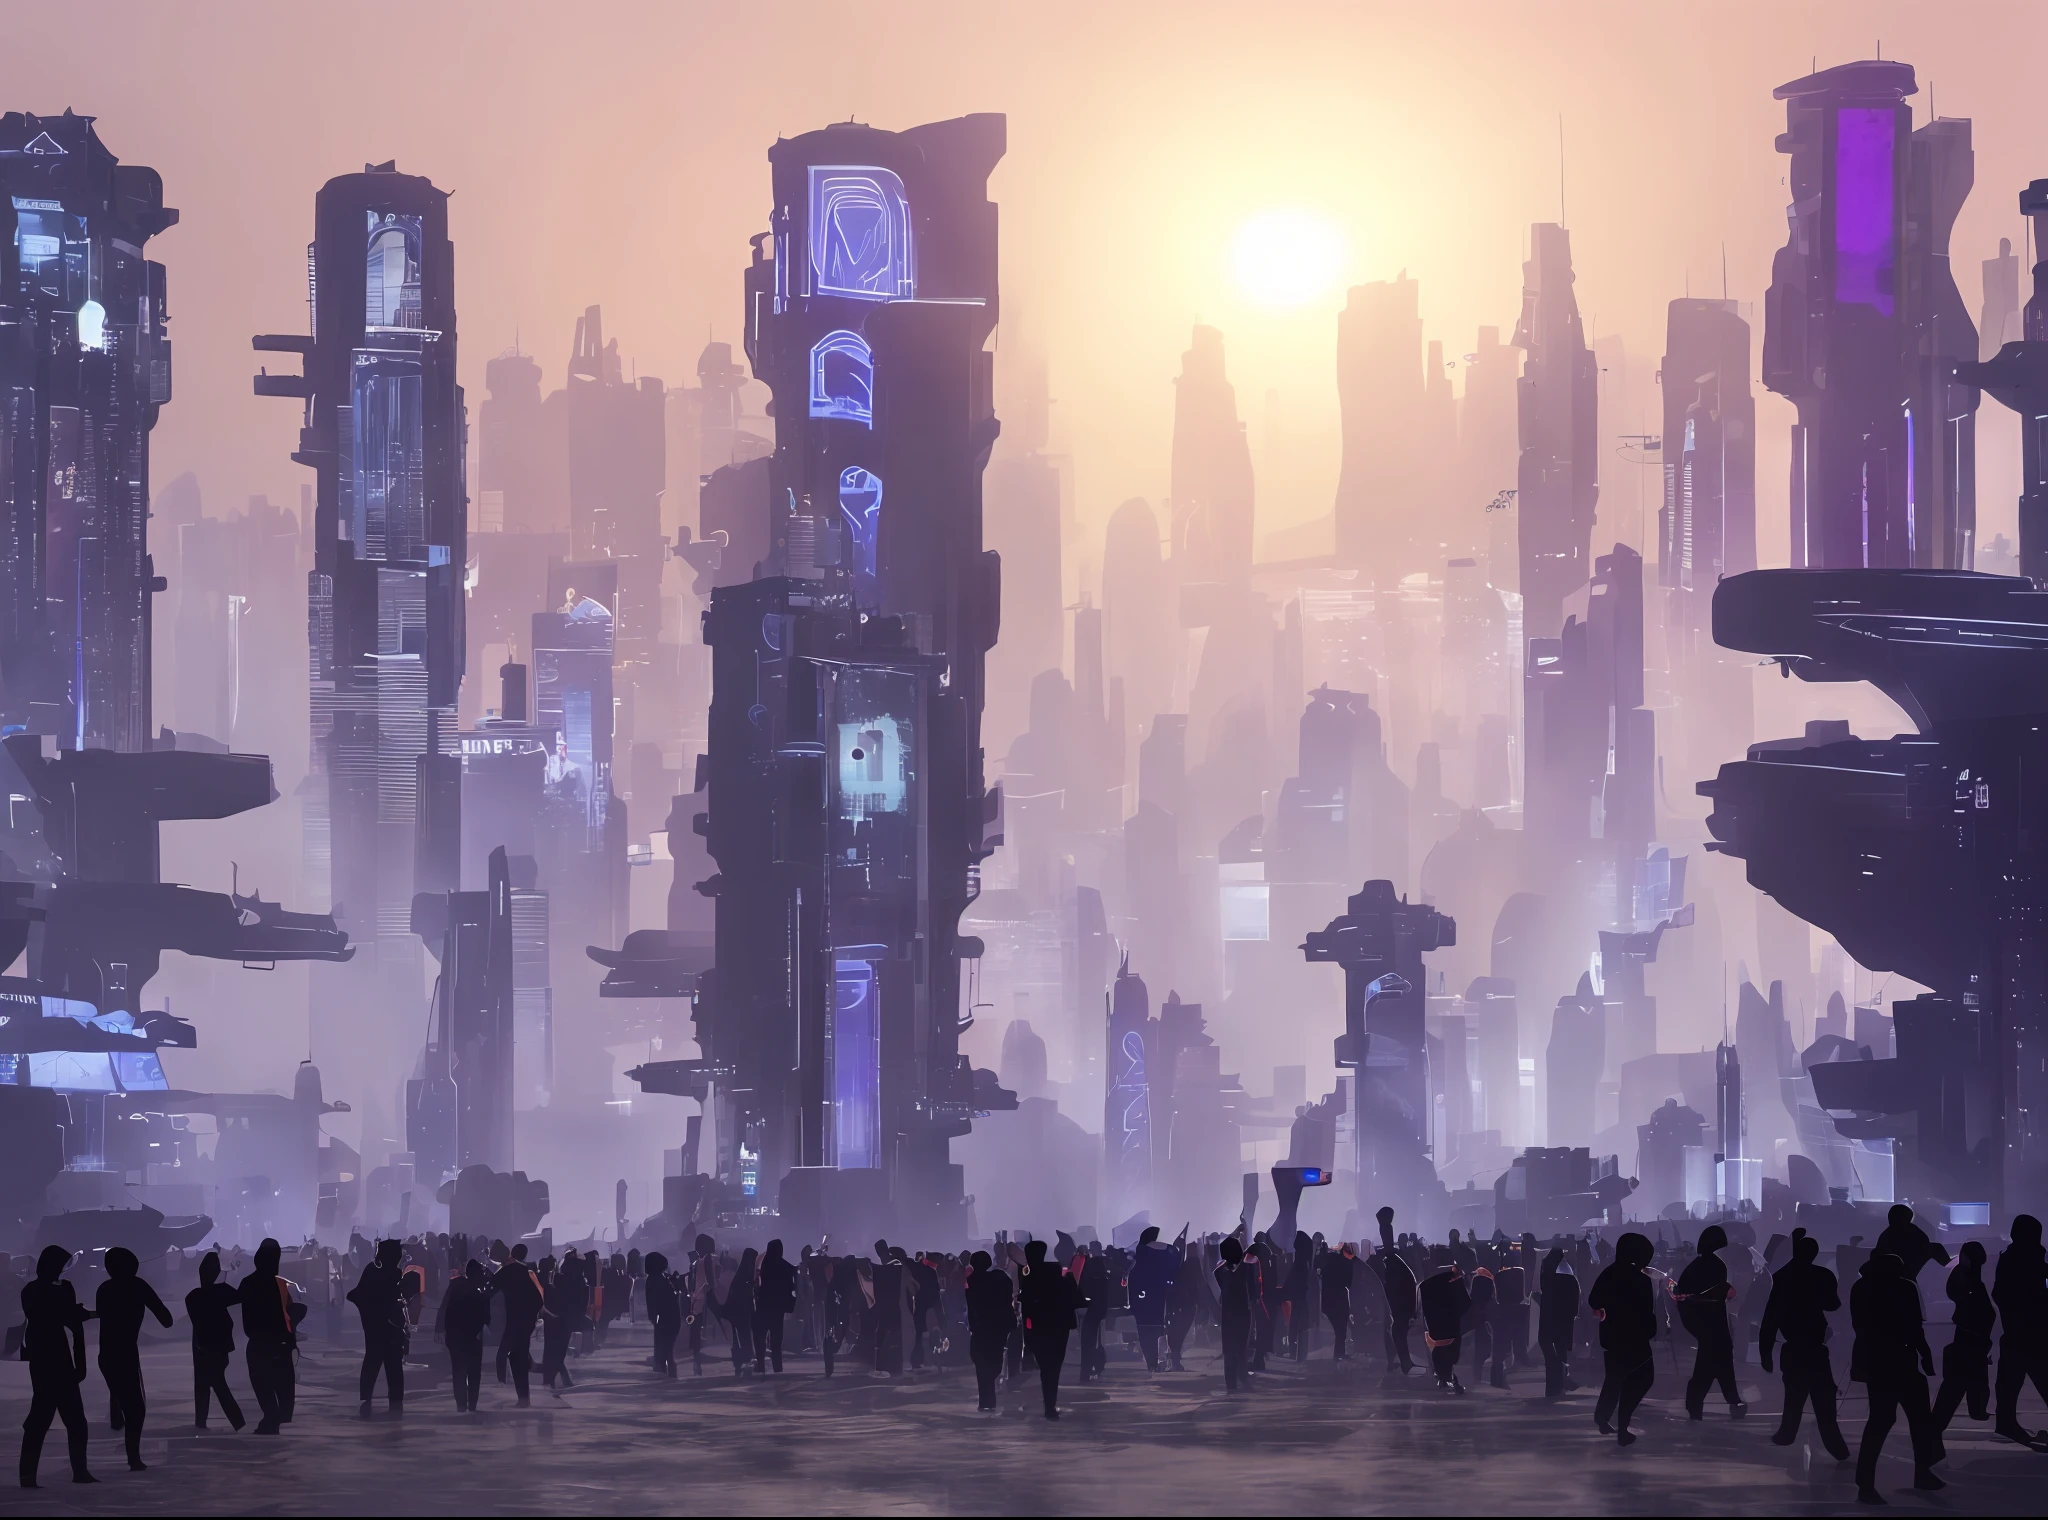 Many aliens with human-like bodies, march in the futuristic cyber city